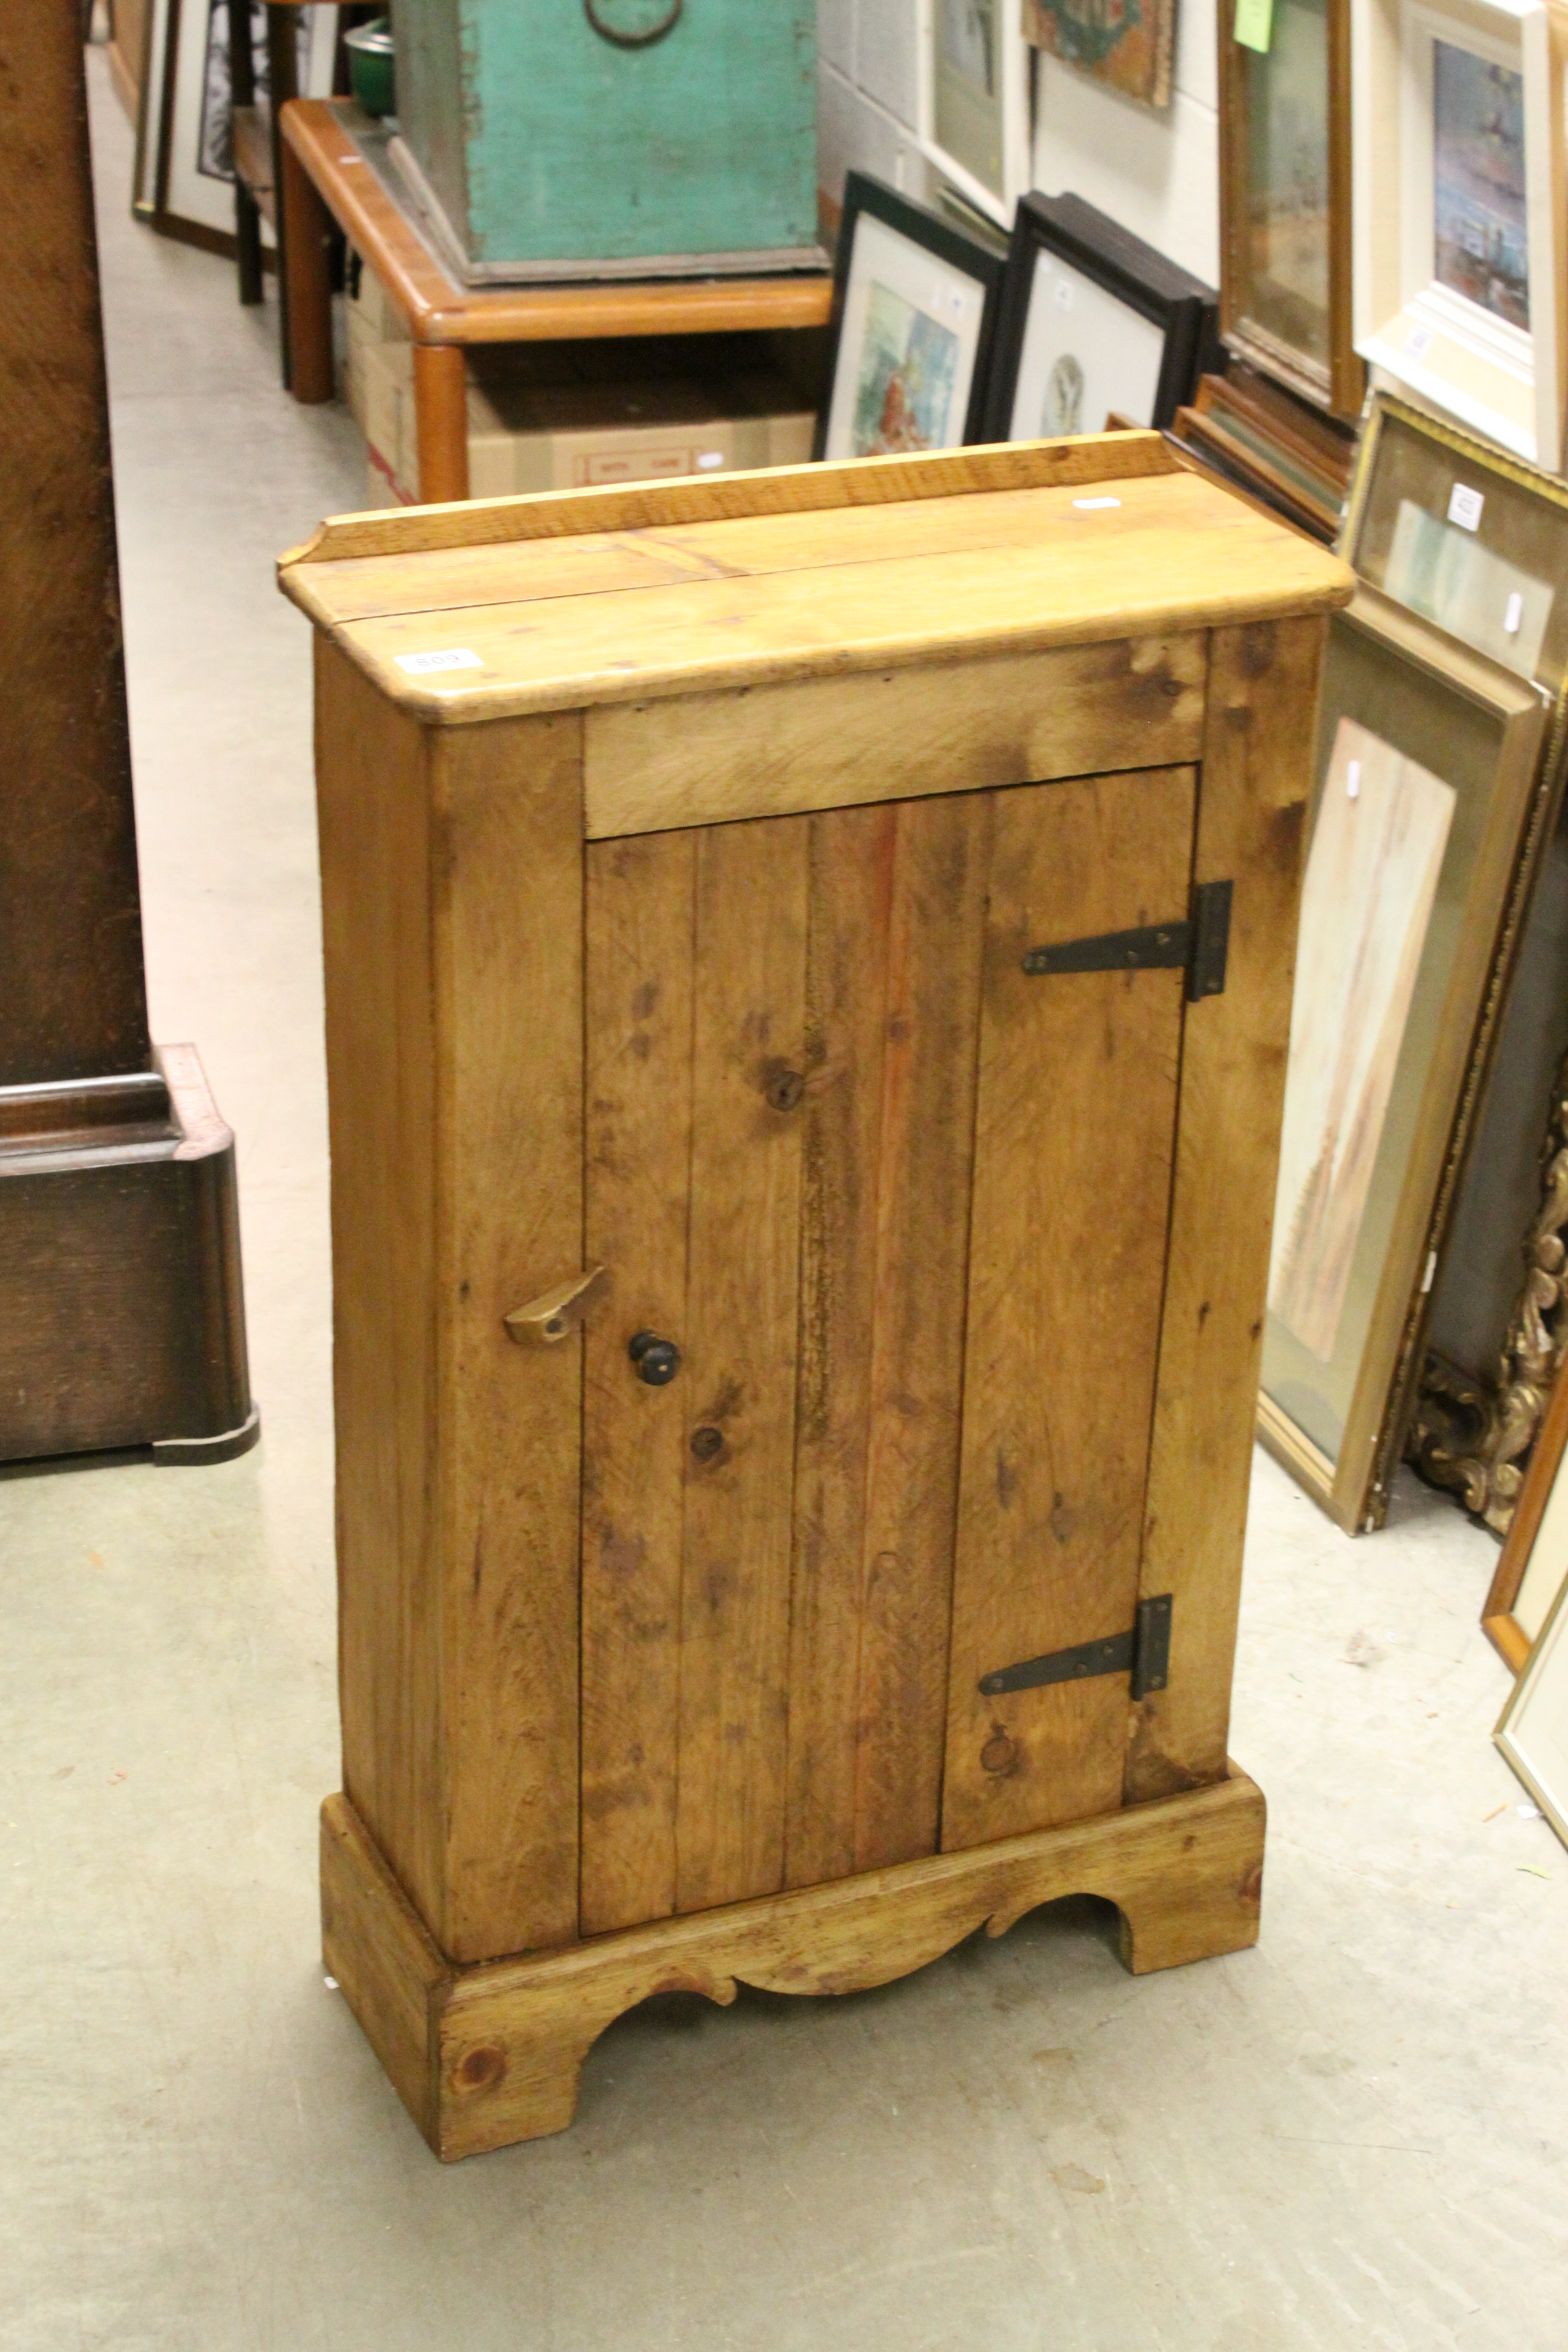 Pine kitchen storage cupboard, with shelves on shaped base